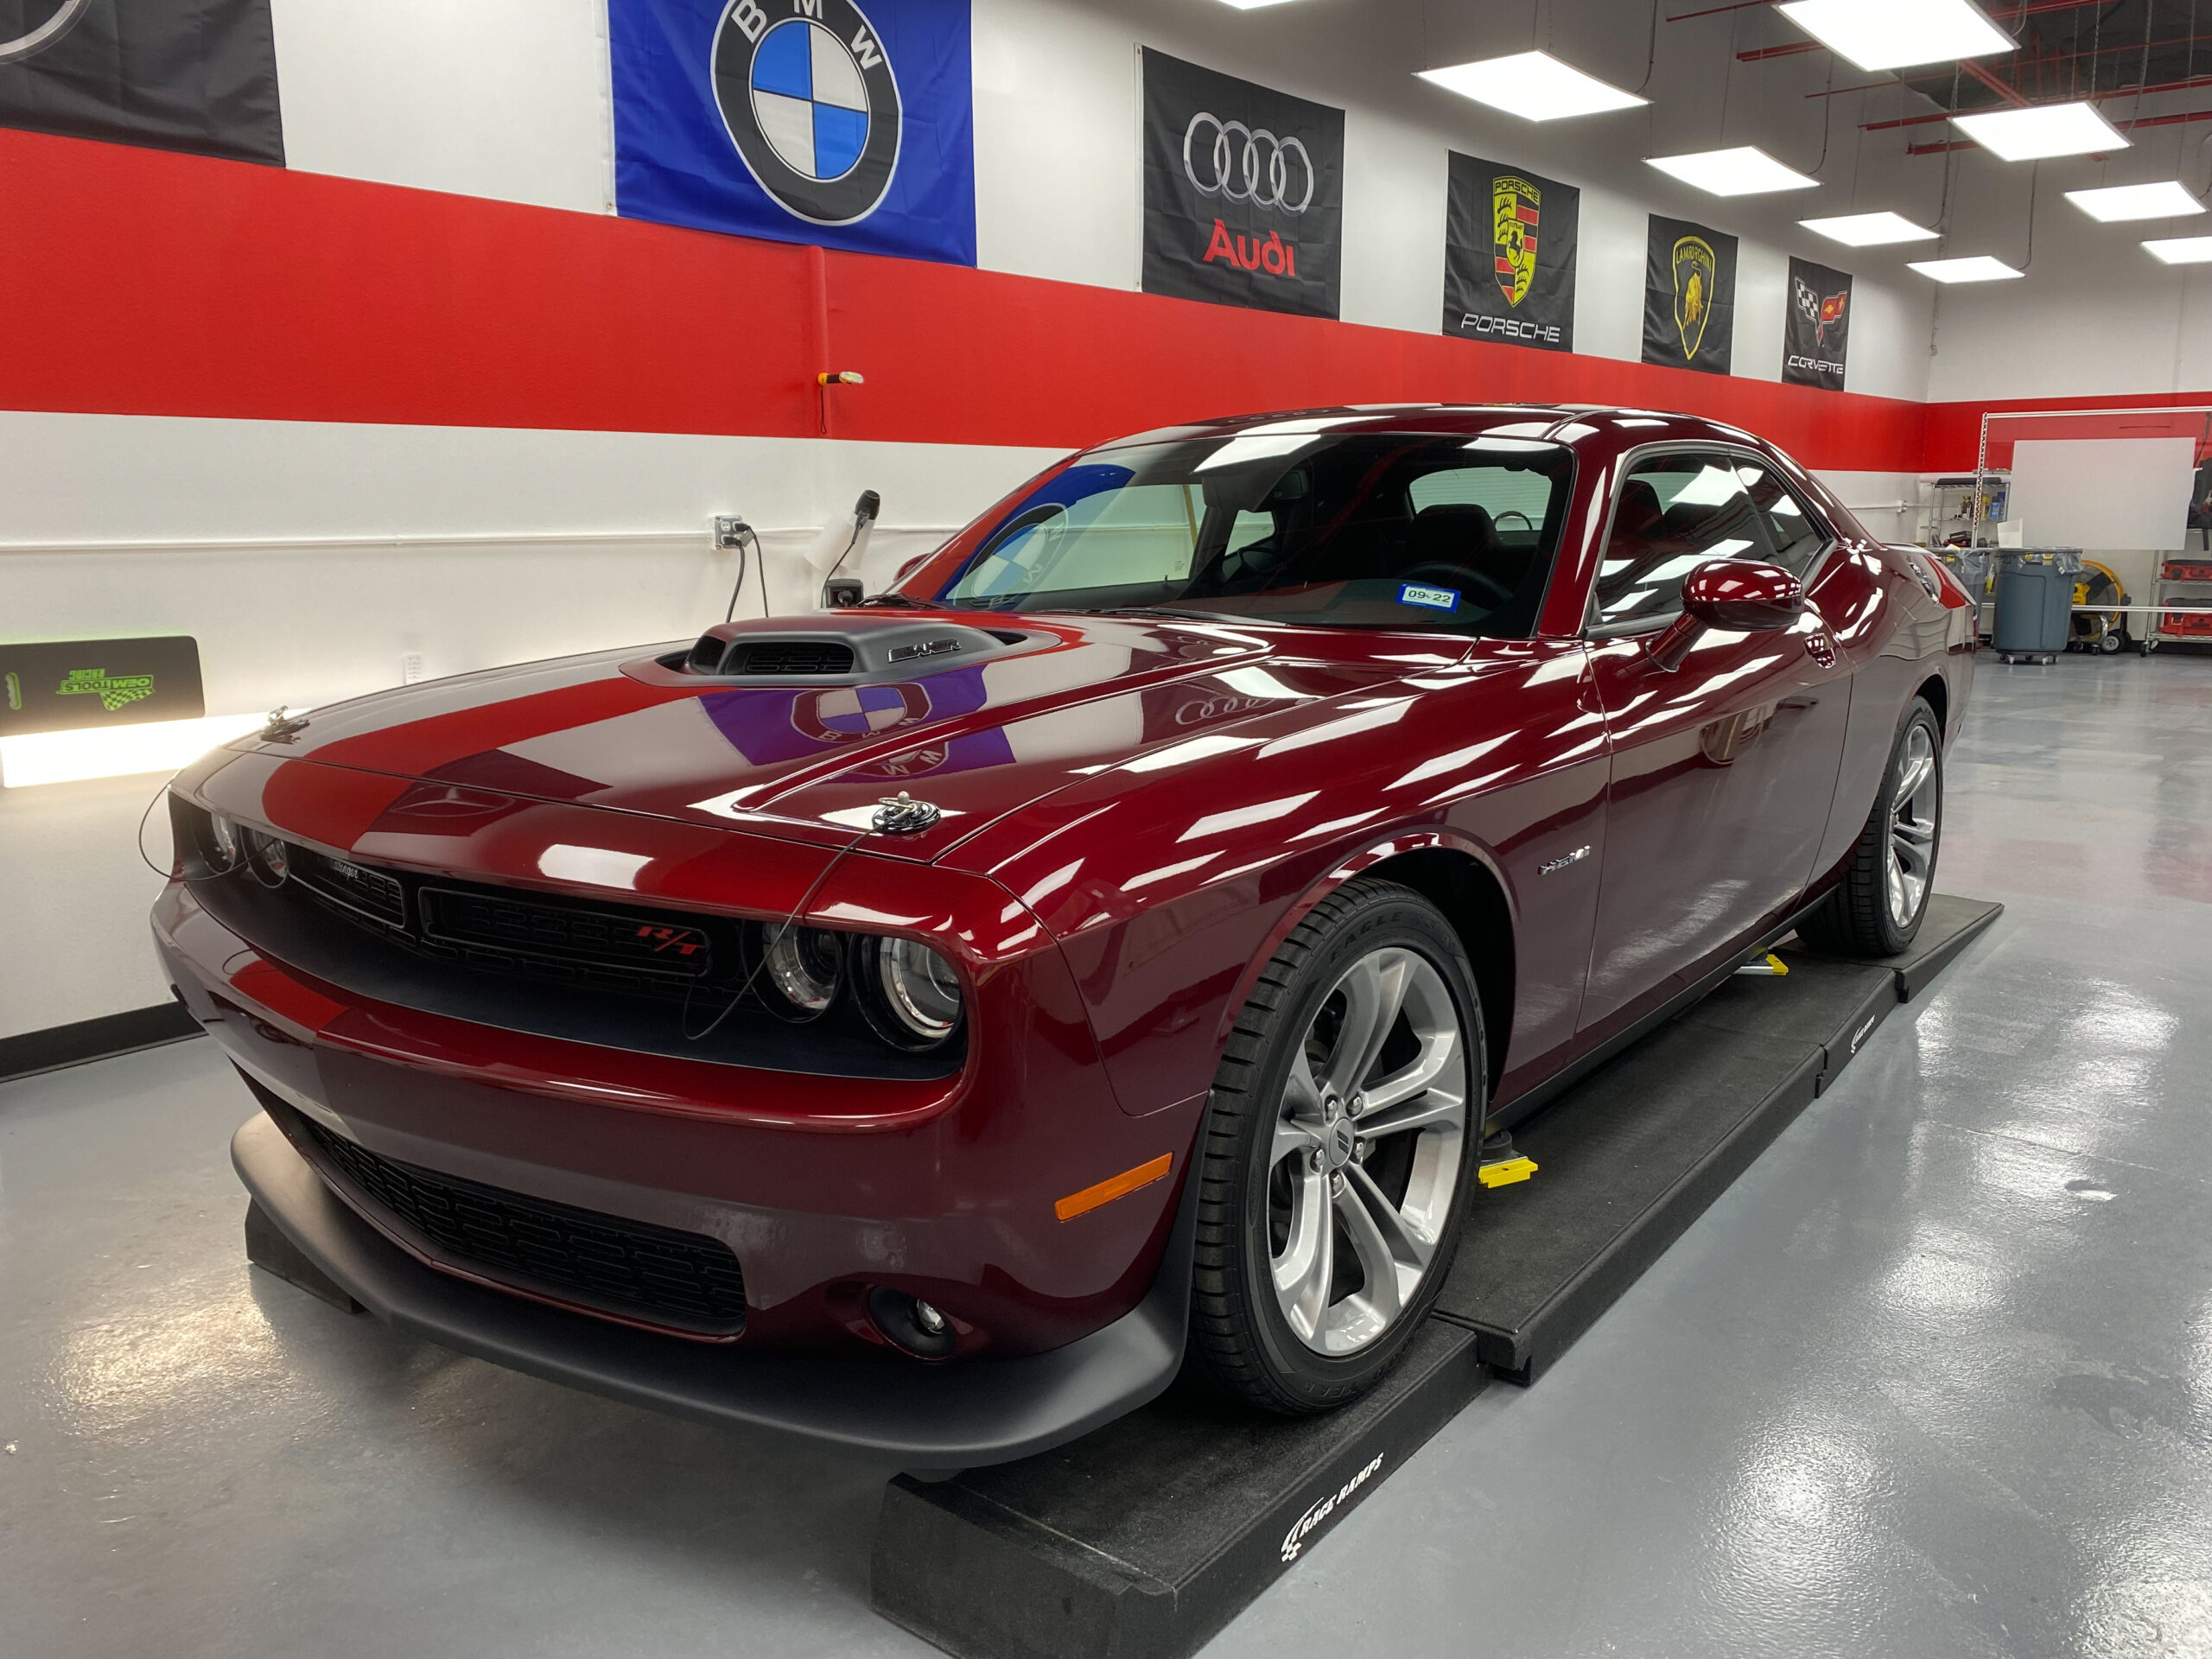 A maroon Dodge Challenger with Performance Clear Bra's Paint Protection Film installation.